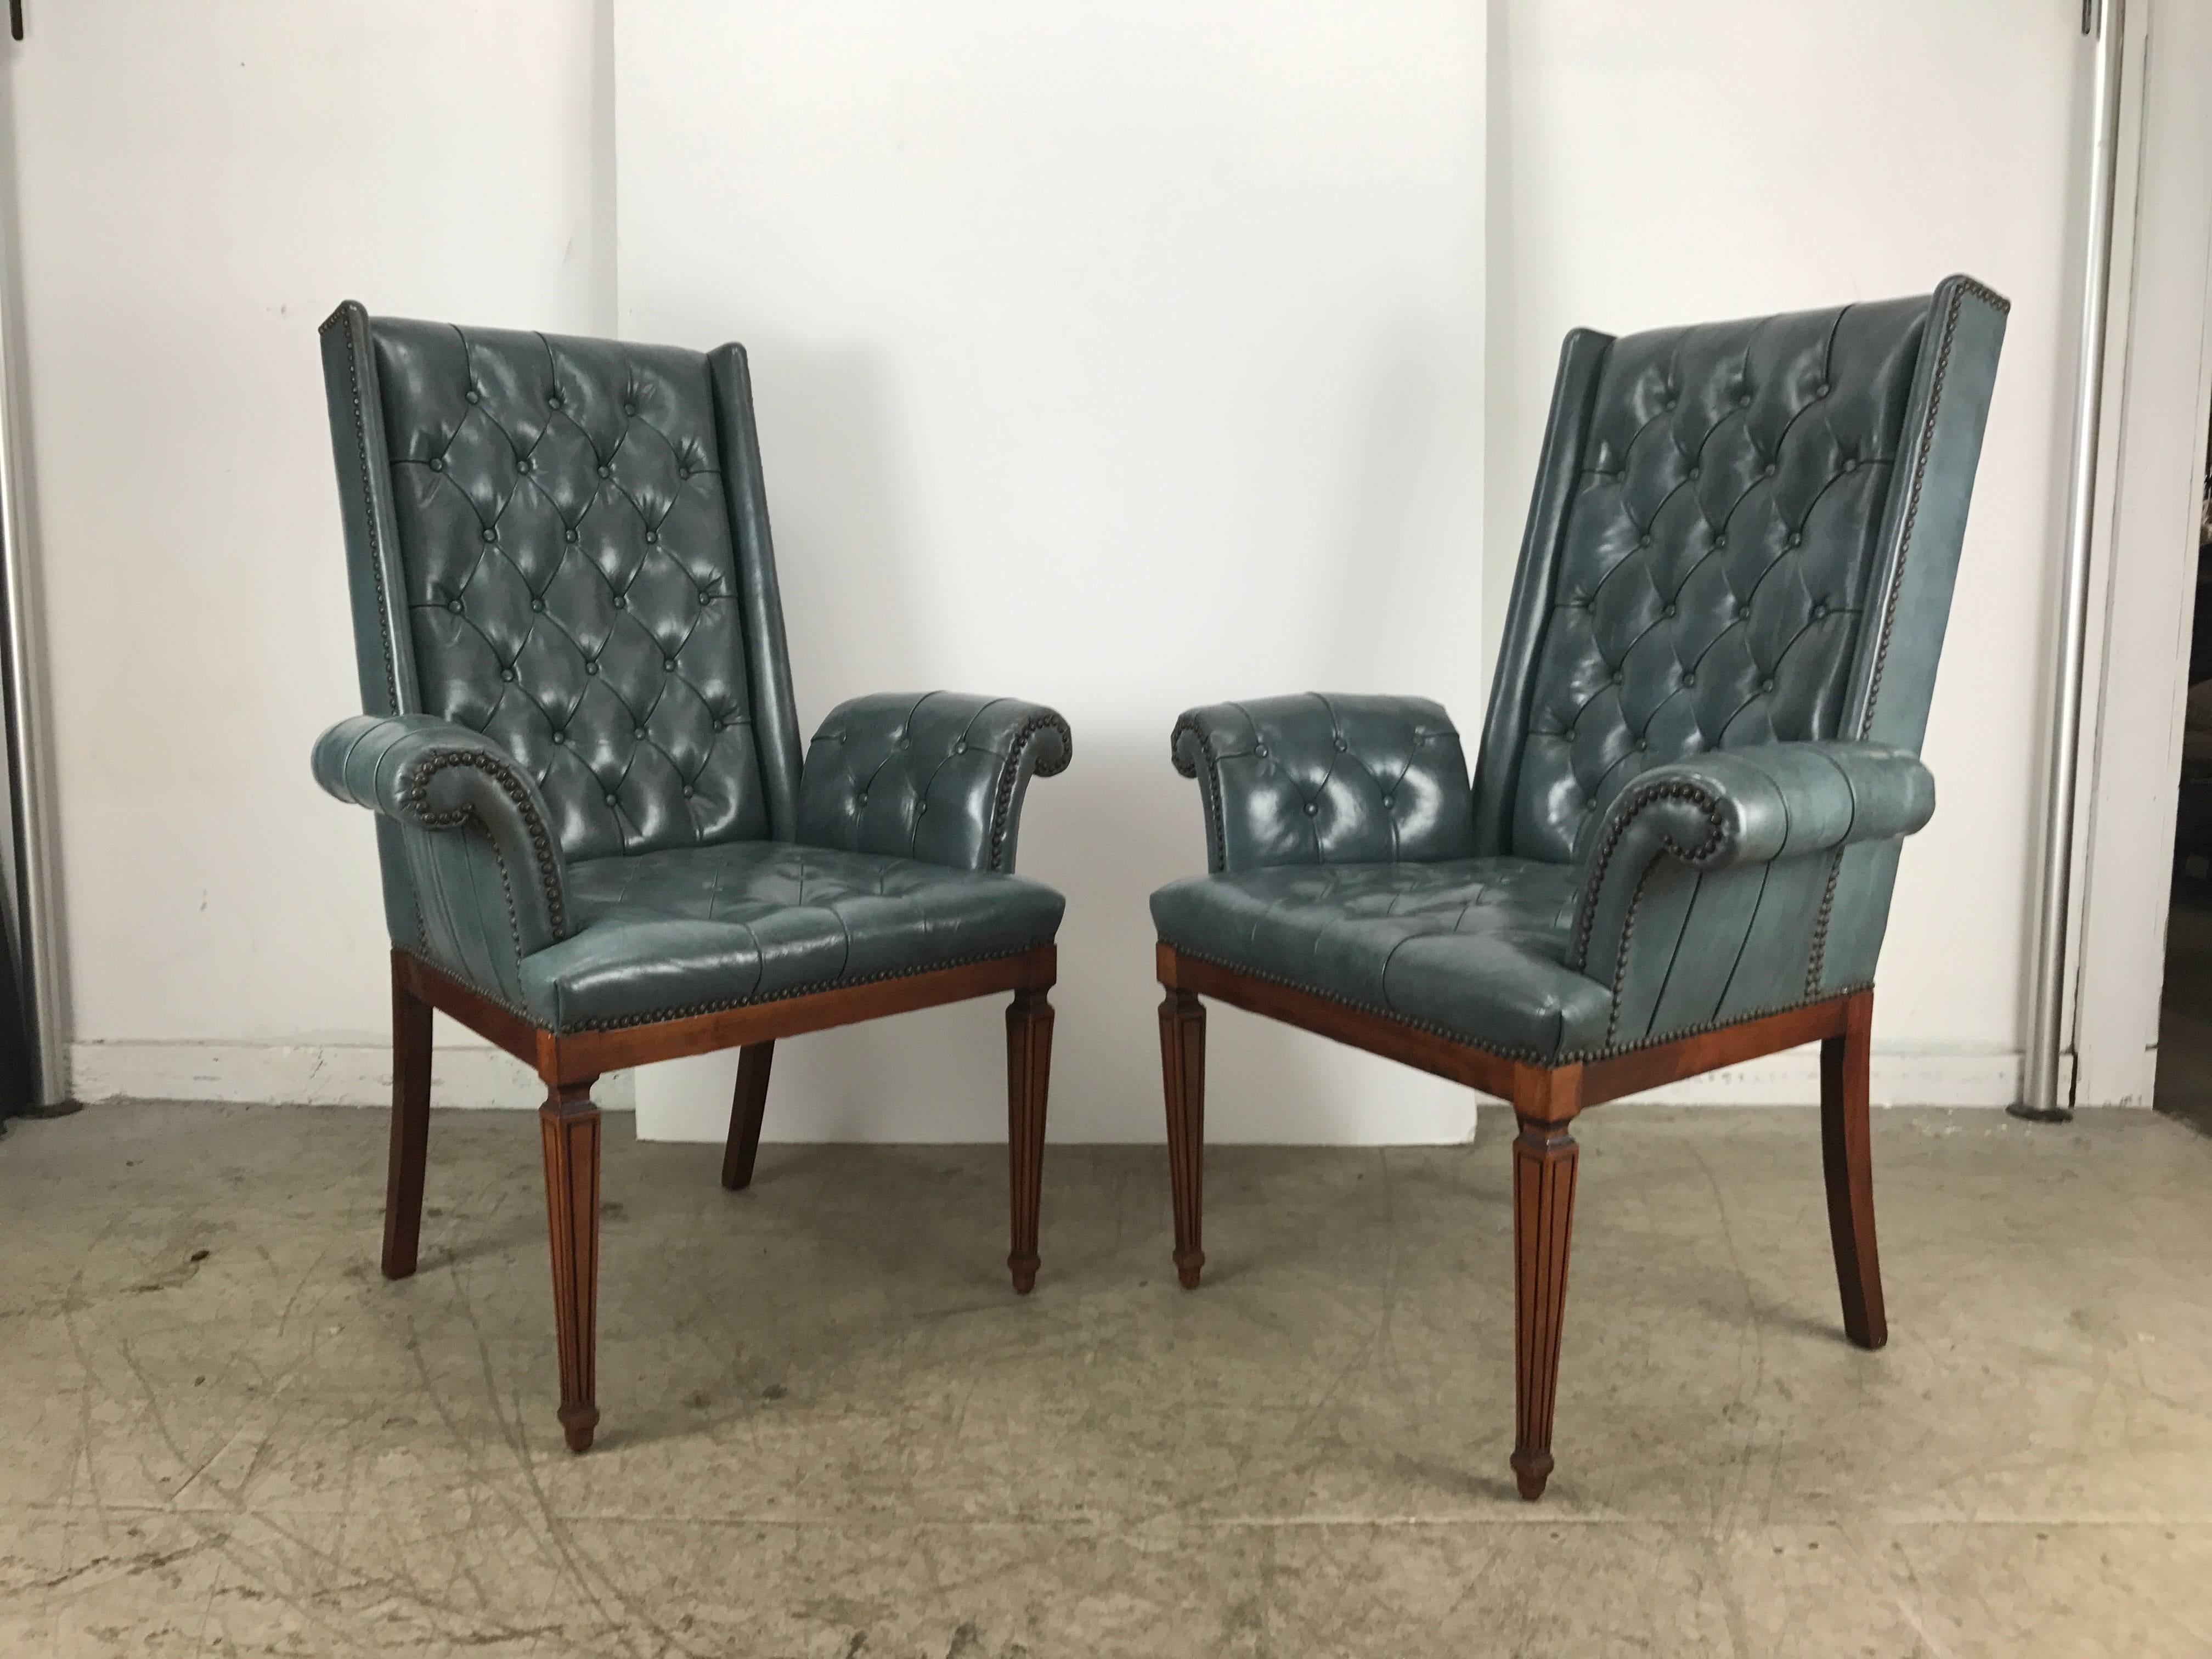 Stunning blue leather button tufted Regency armchairs, attributed to Tommi Parzinger, truly amazing design and color, graceful rolled arms, high winged tufted back. Superior quality and construction, extremely comfortable, 25 inch arm height from